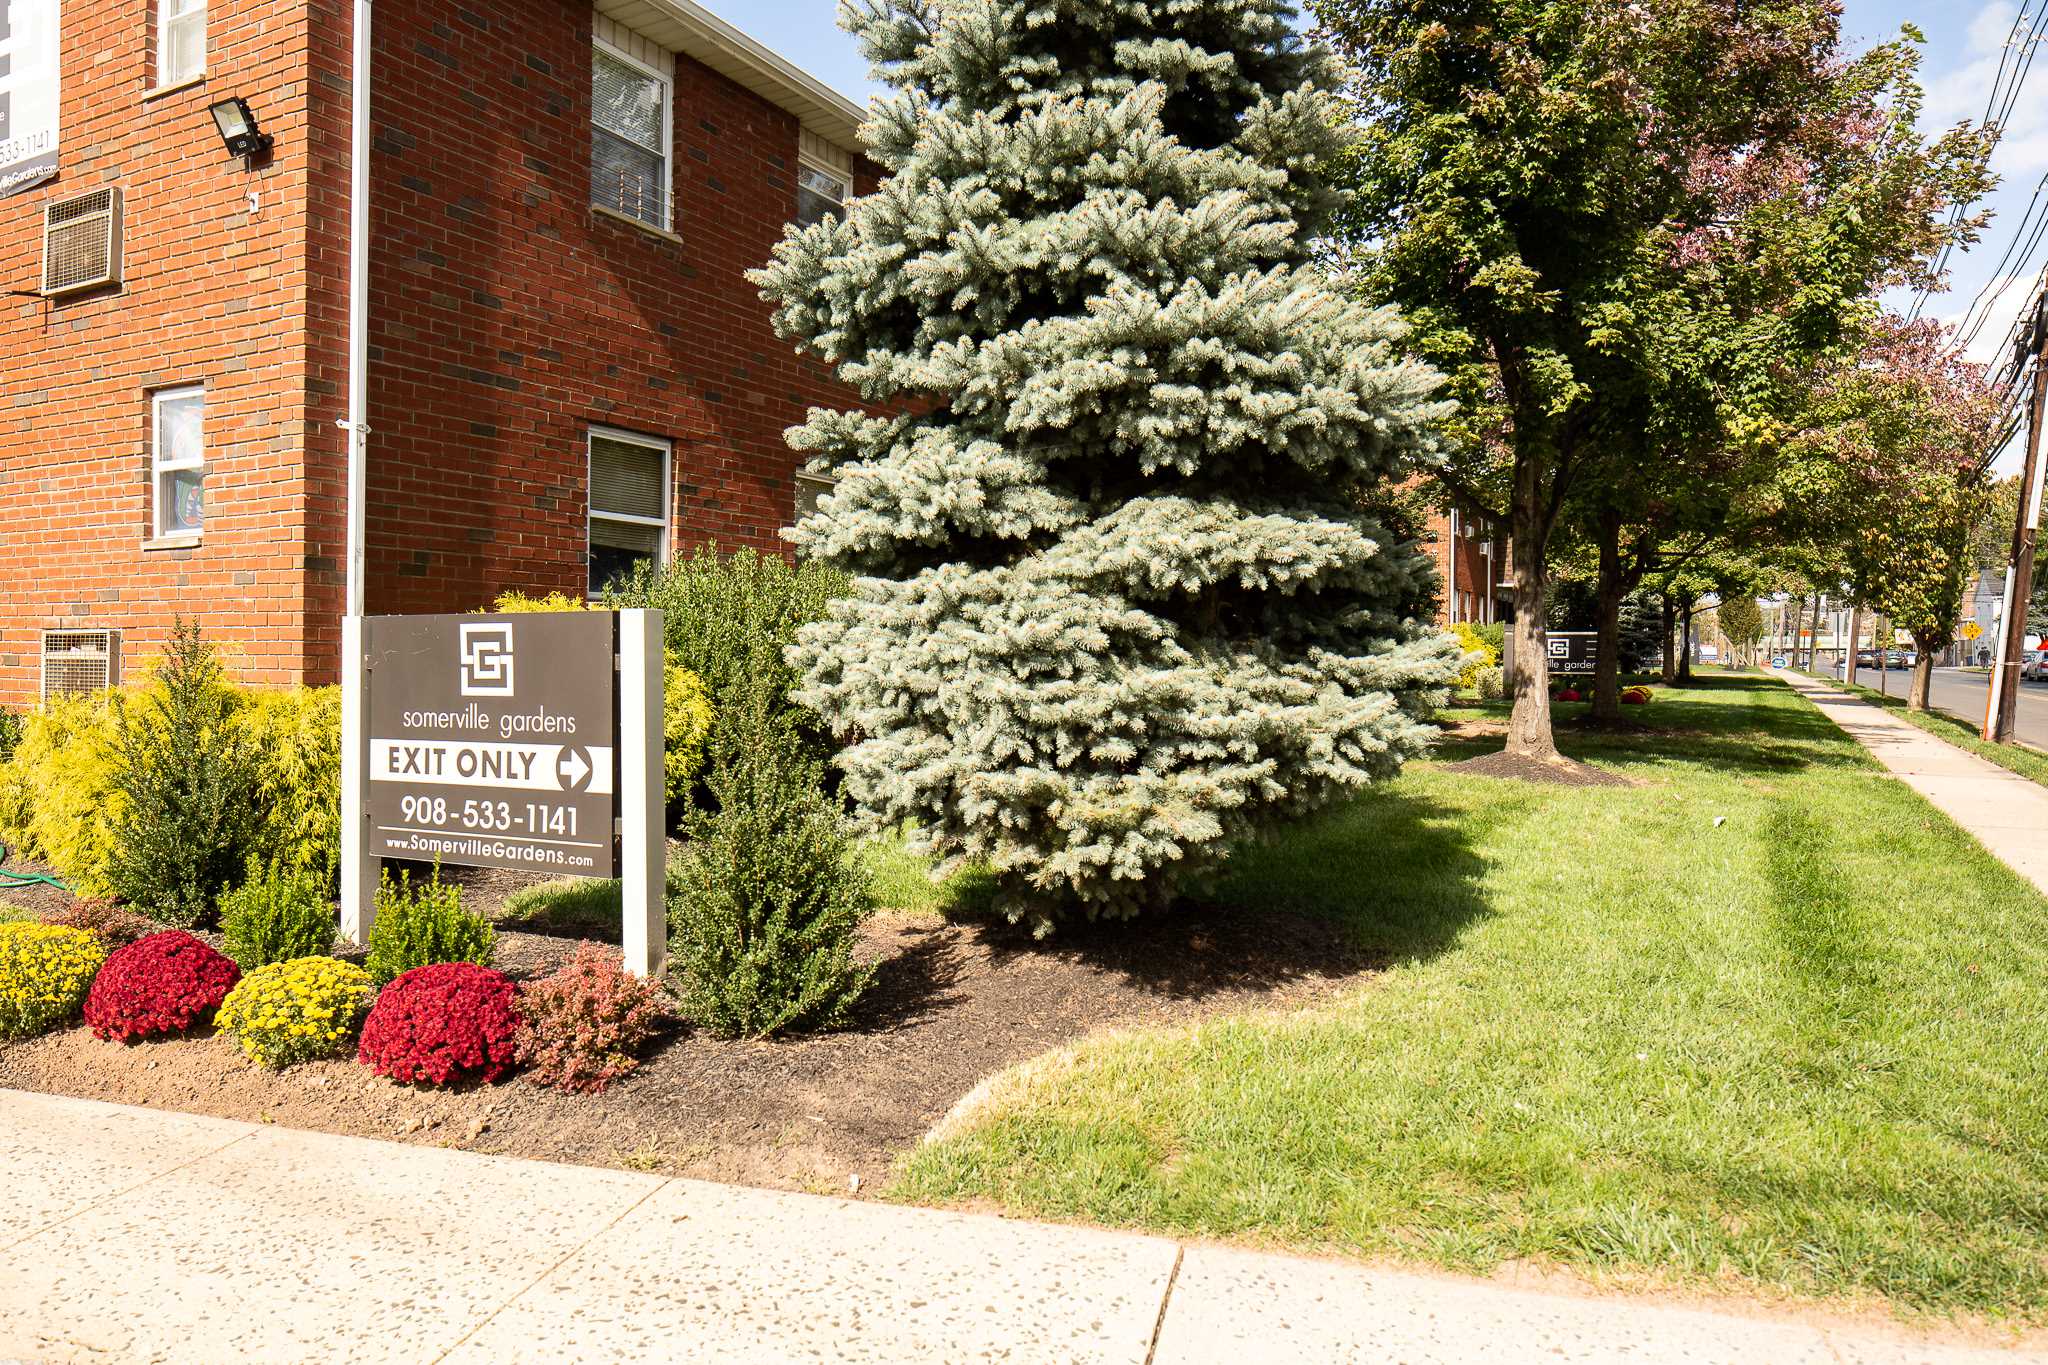 Lush landscaping at Somerville Gardens Apartments in Somerville, New Jersey